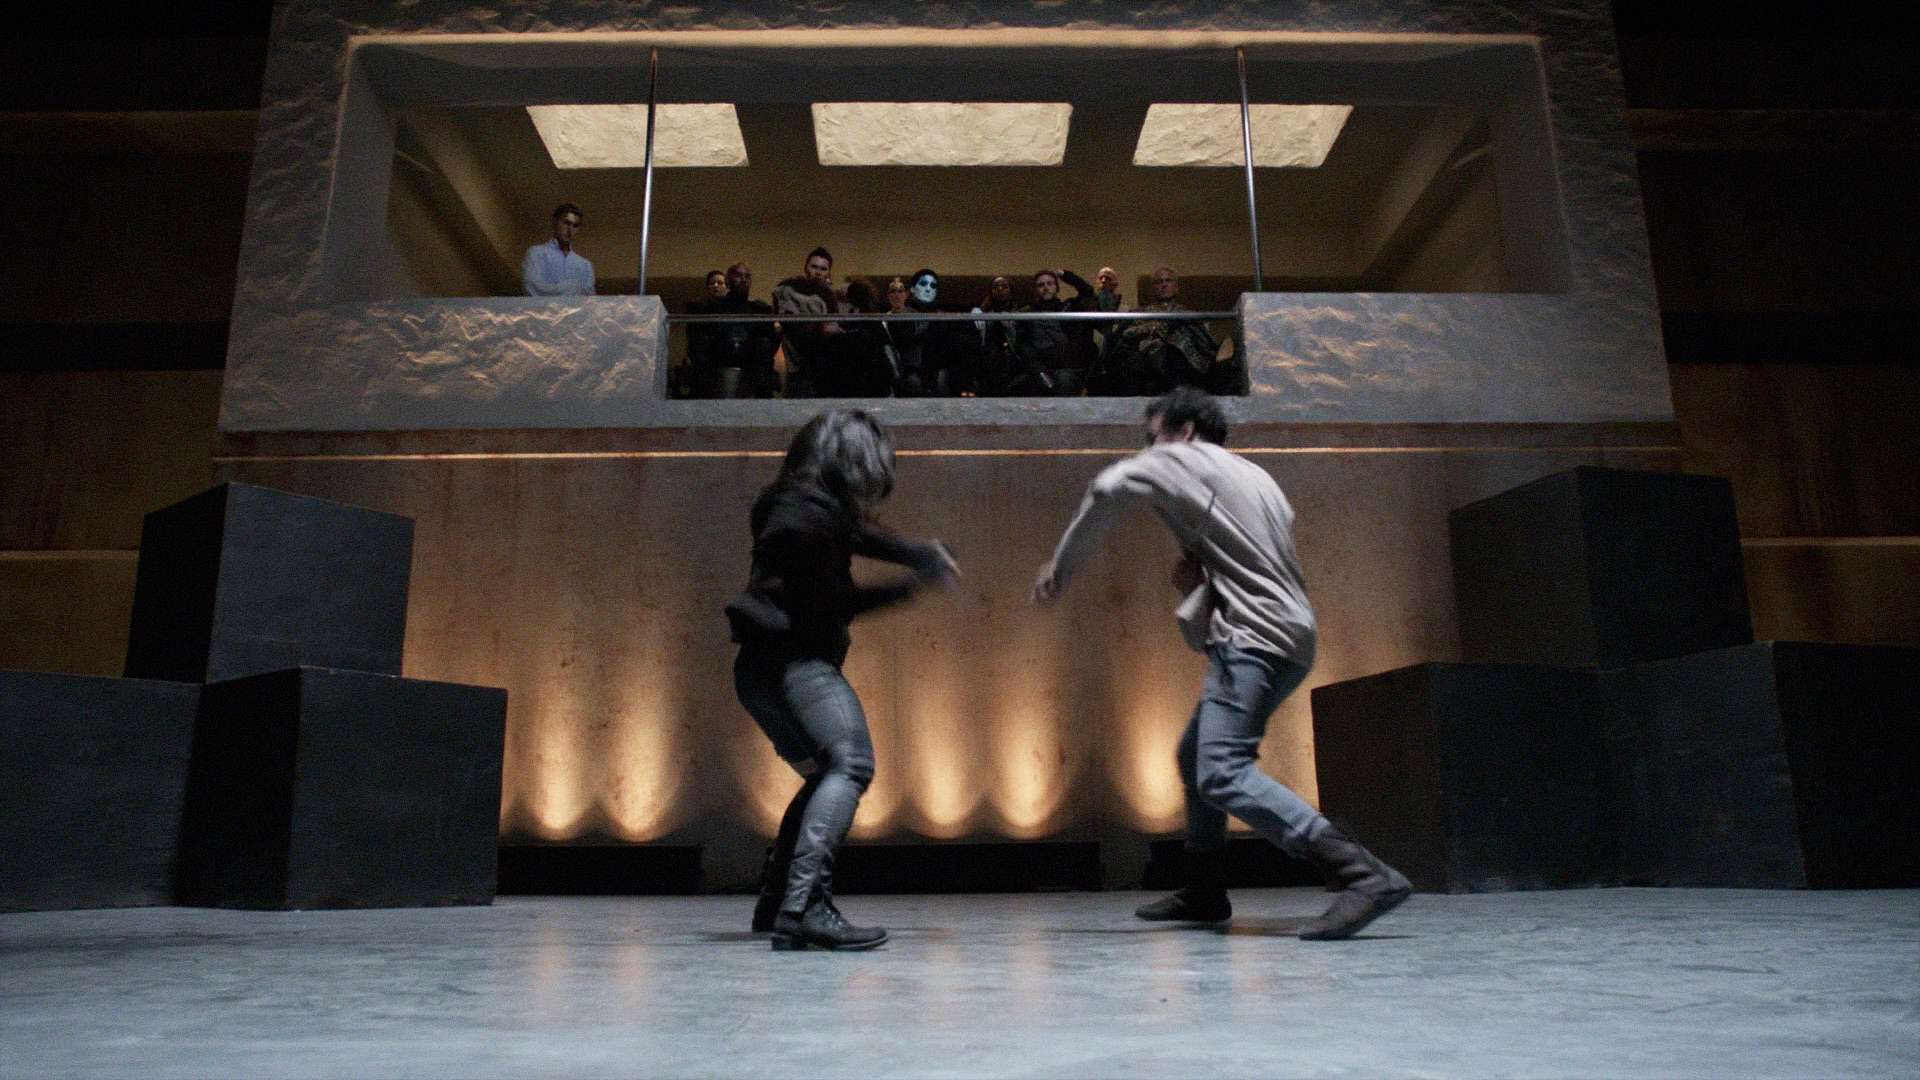 Marvels-Agents-Of-SHIELD-5.06-Fun-Games-Ben-May-fight